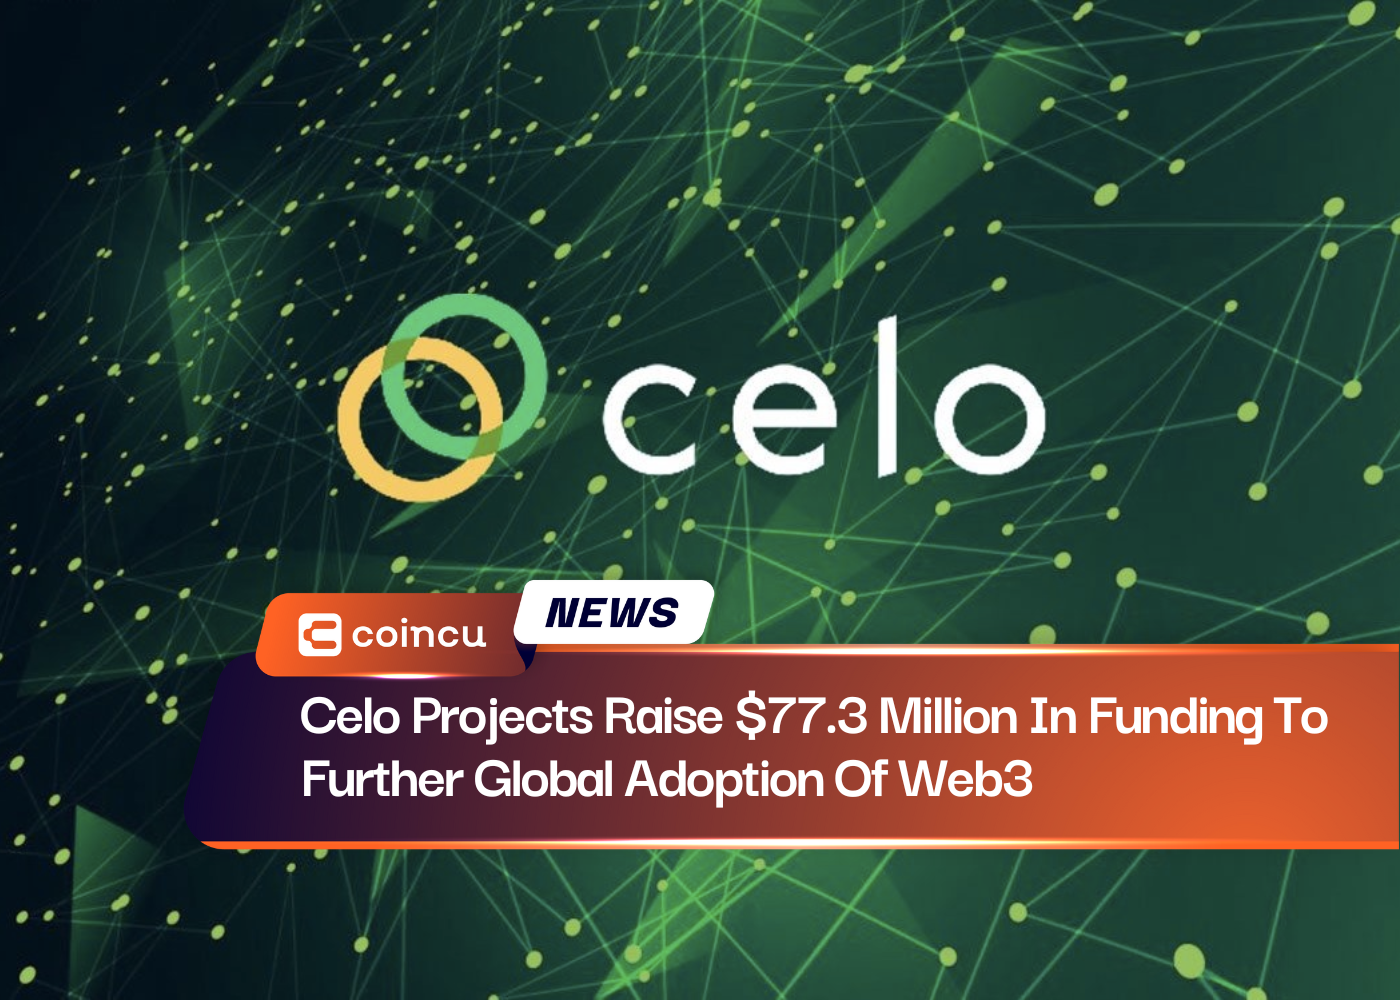 Celo Projects Raise $77.3 Million In Funding To Further Global Adoption Of Web3